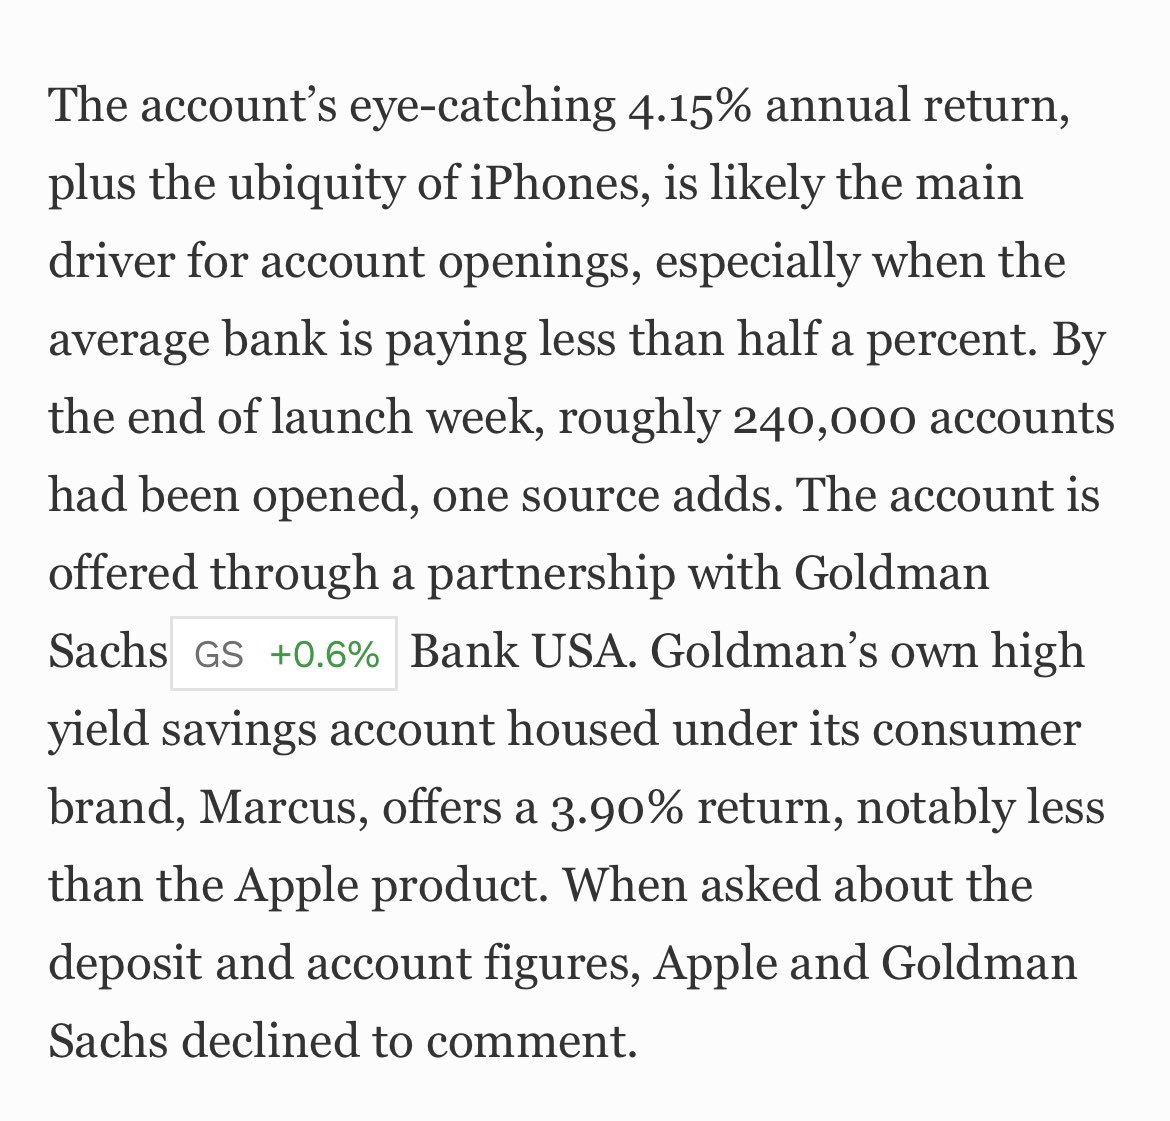 Apple’s new savings account took in nearly $1 billion in deposits in its first four days: forbes.com/sites/emilymas…. Great scoop by @emilymason00.